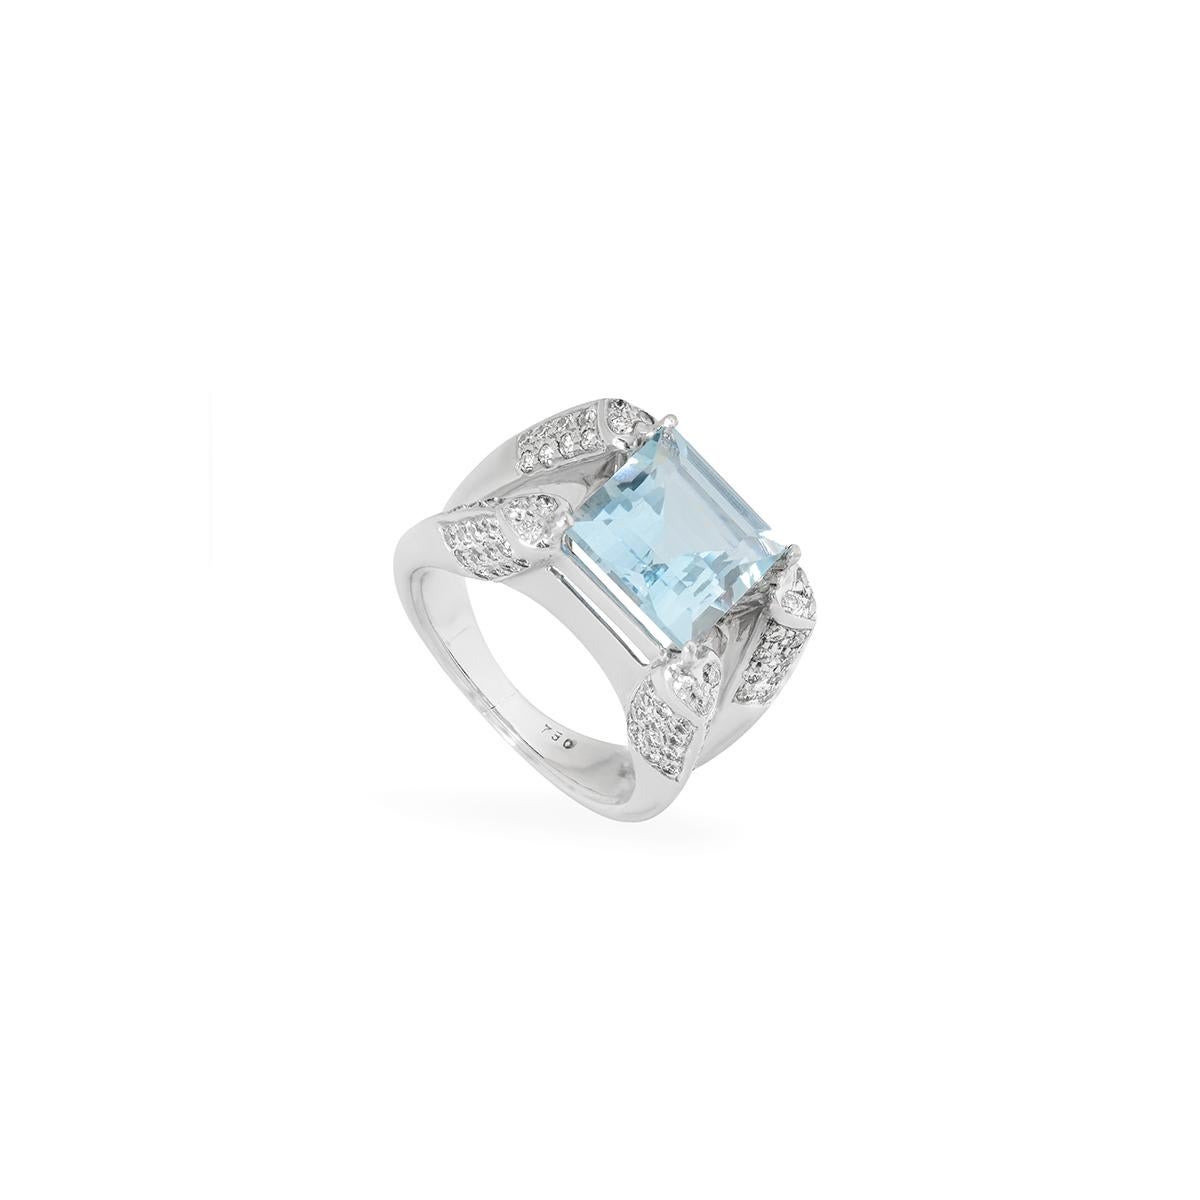 An 18k white gold aquamarine and diamond dress ring. The ring is set to the centre with a square step cut aquamarine, weighing approximately 3.91ct, displaying a deep even blue throughout. The stone is set within a diamond set mount of which